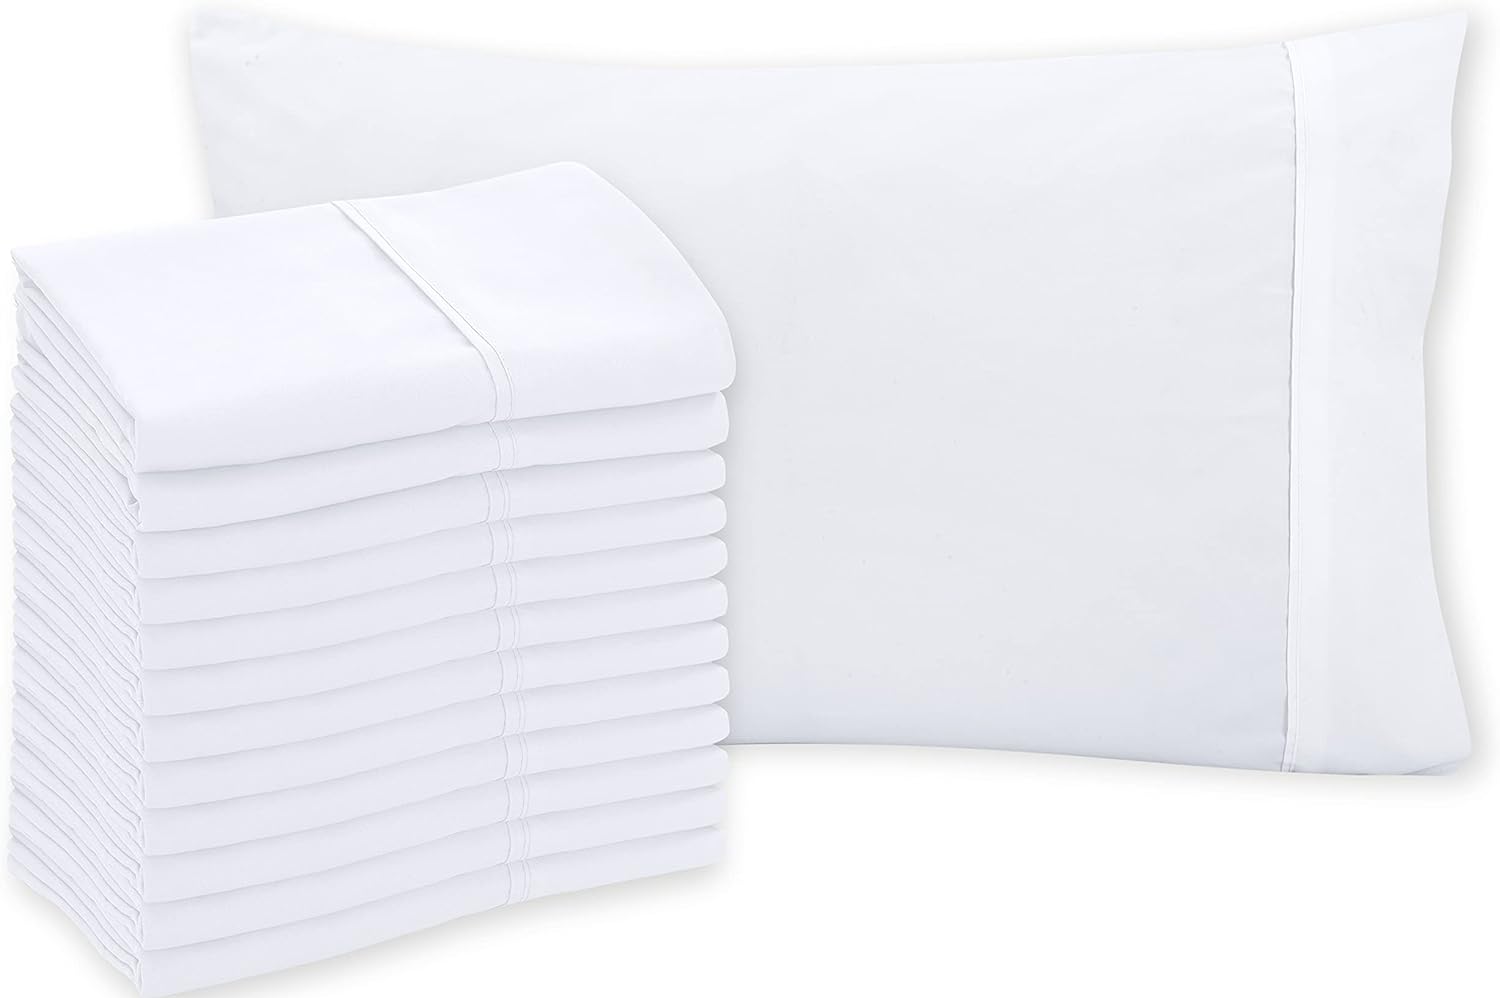 Royale Linens White Pillowcase Set of 12 - Queen 20"x30" Bed Pillow Cover - 1800 Brushed Microfiber - Wrinkle & Fade Resistant - Bulk Pillow Cases - Hotel Quality Pillow Case 12 Pack (Queen, White)